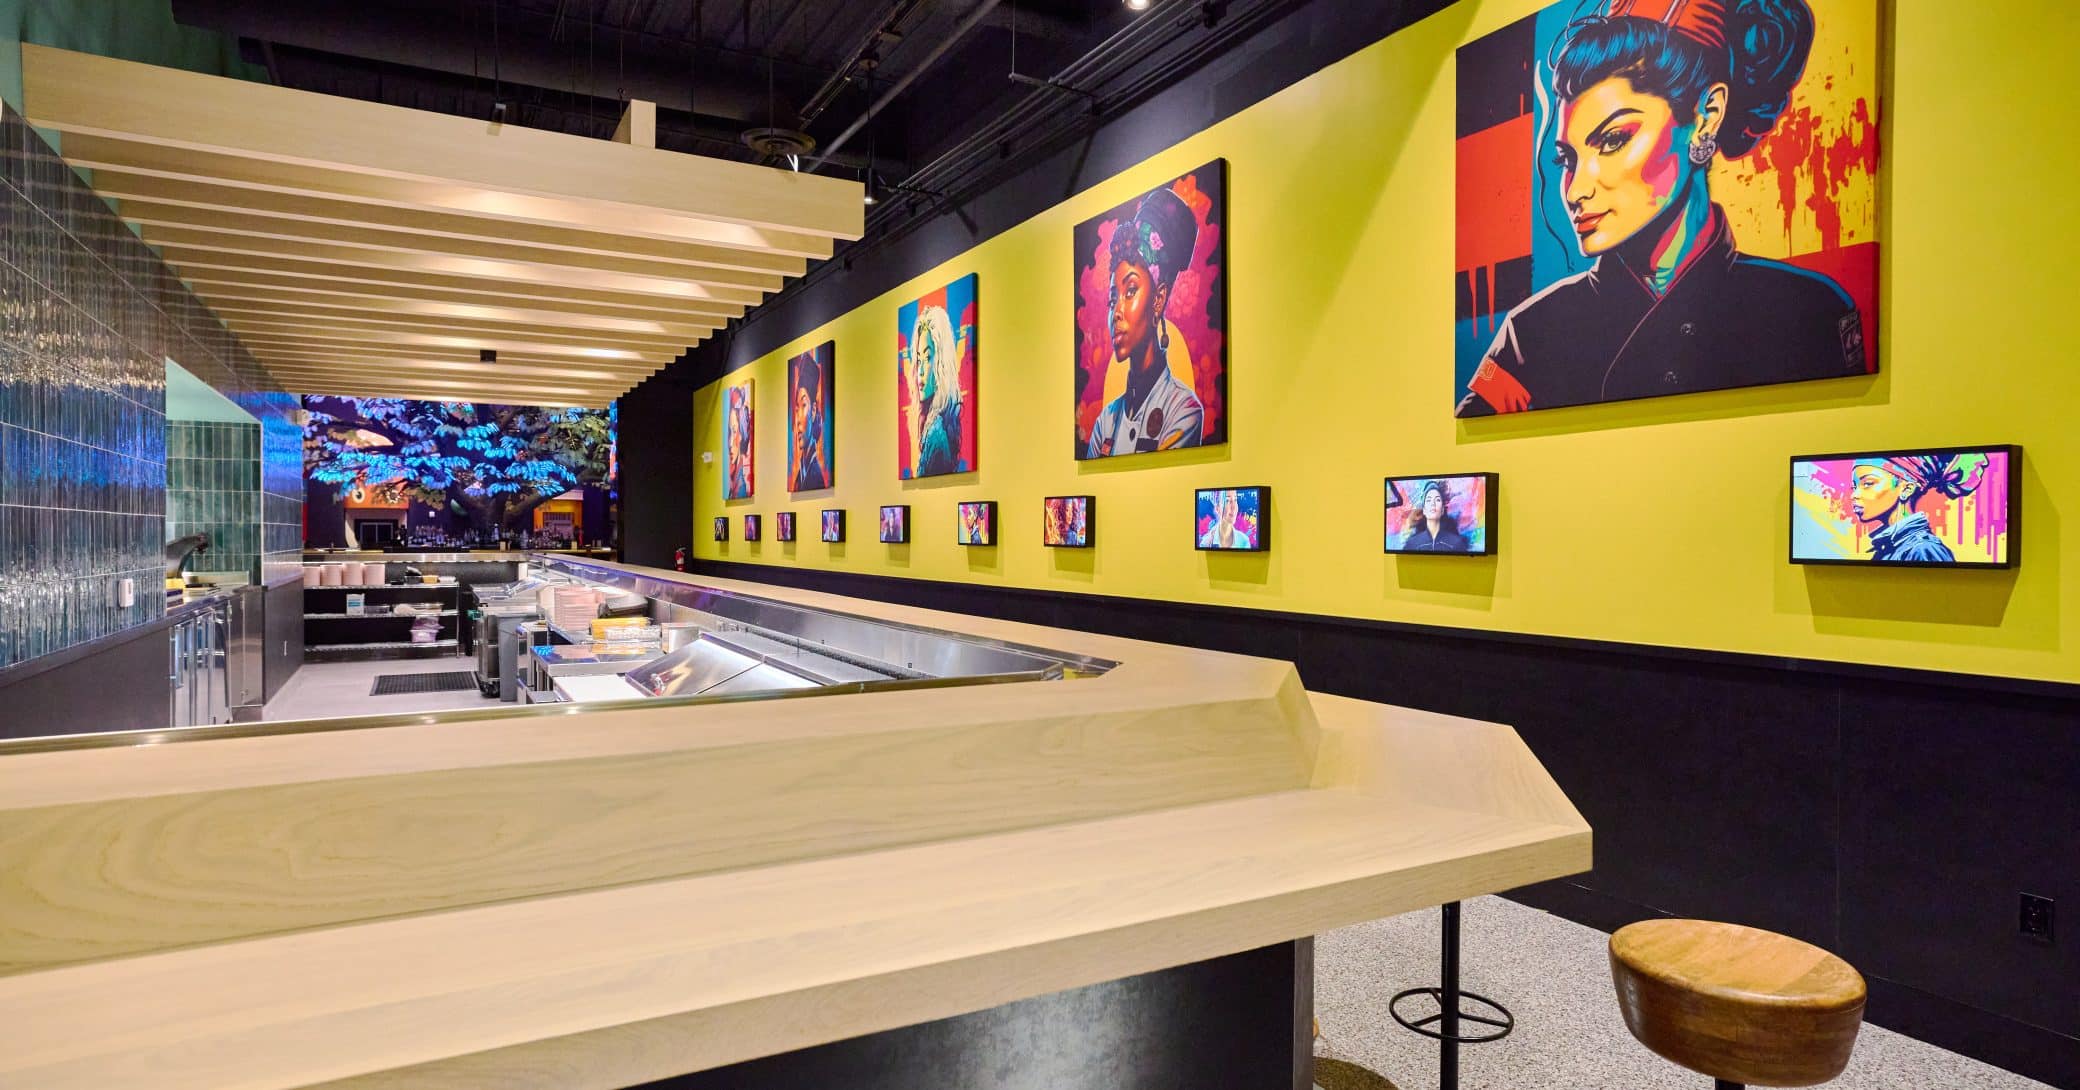 Kalb Industries completed a restaurant tenant improvement for Kaia Handroll Sushi Restaurant.